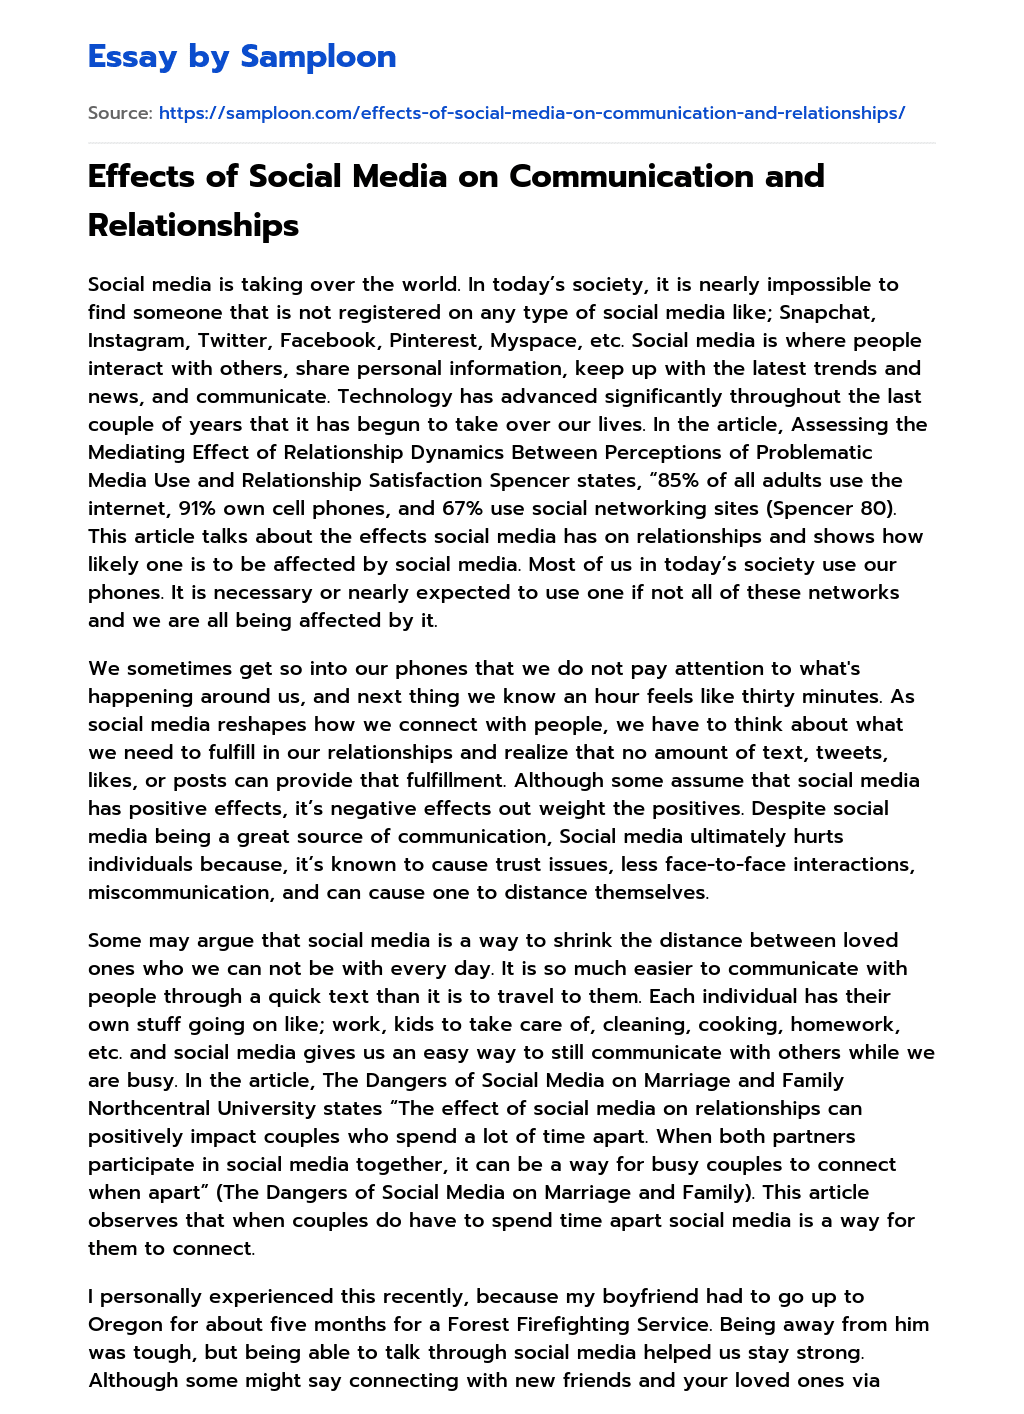 essay about social media and relationships